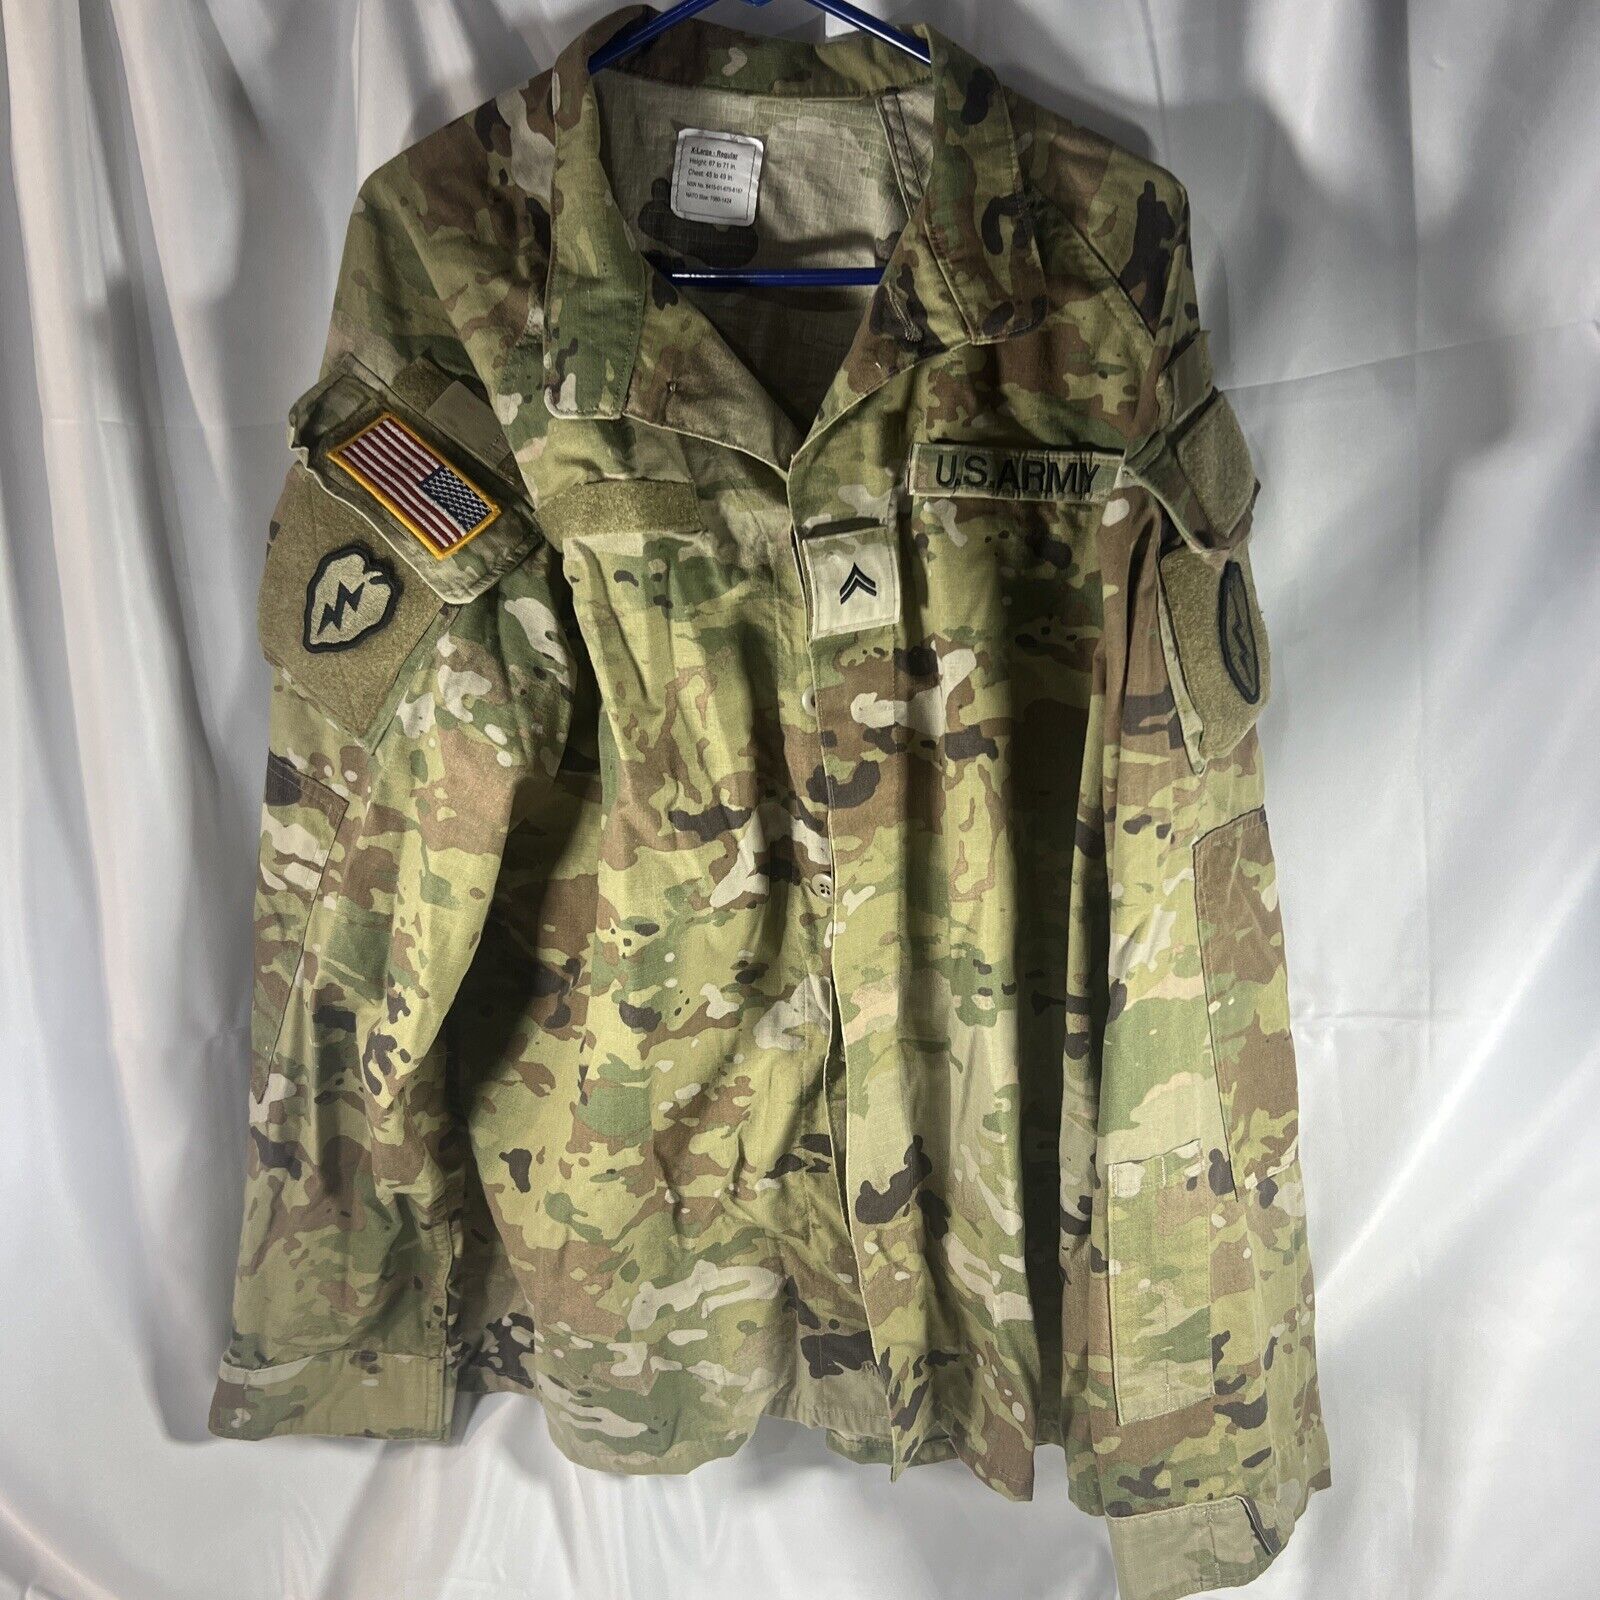 US Army Mens Uniform Top XL Green Brown Black Camo Military Issued With Patches